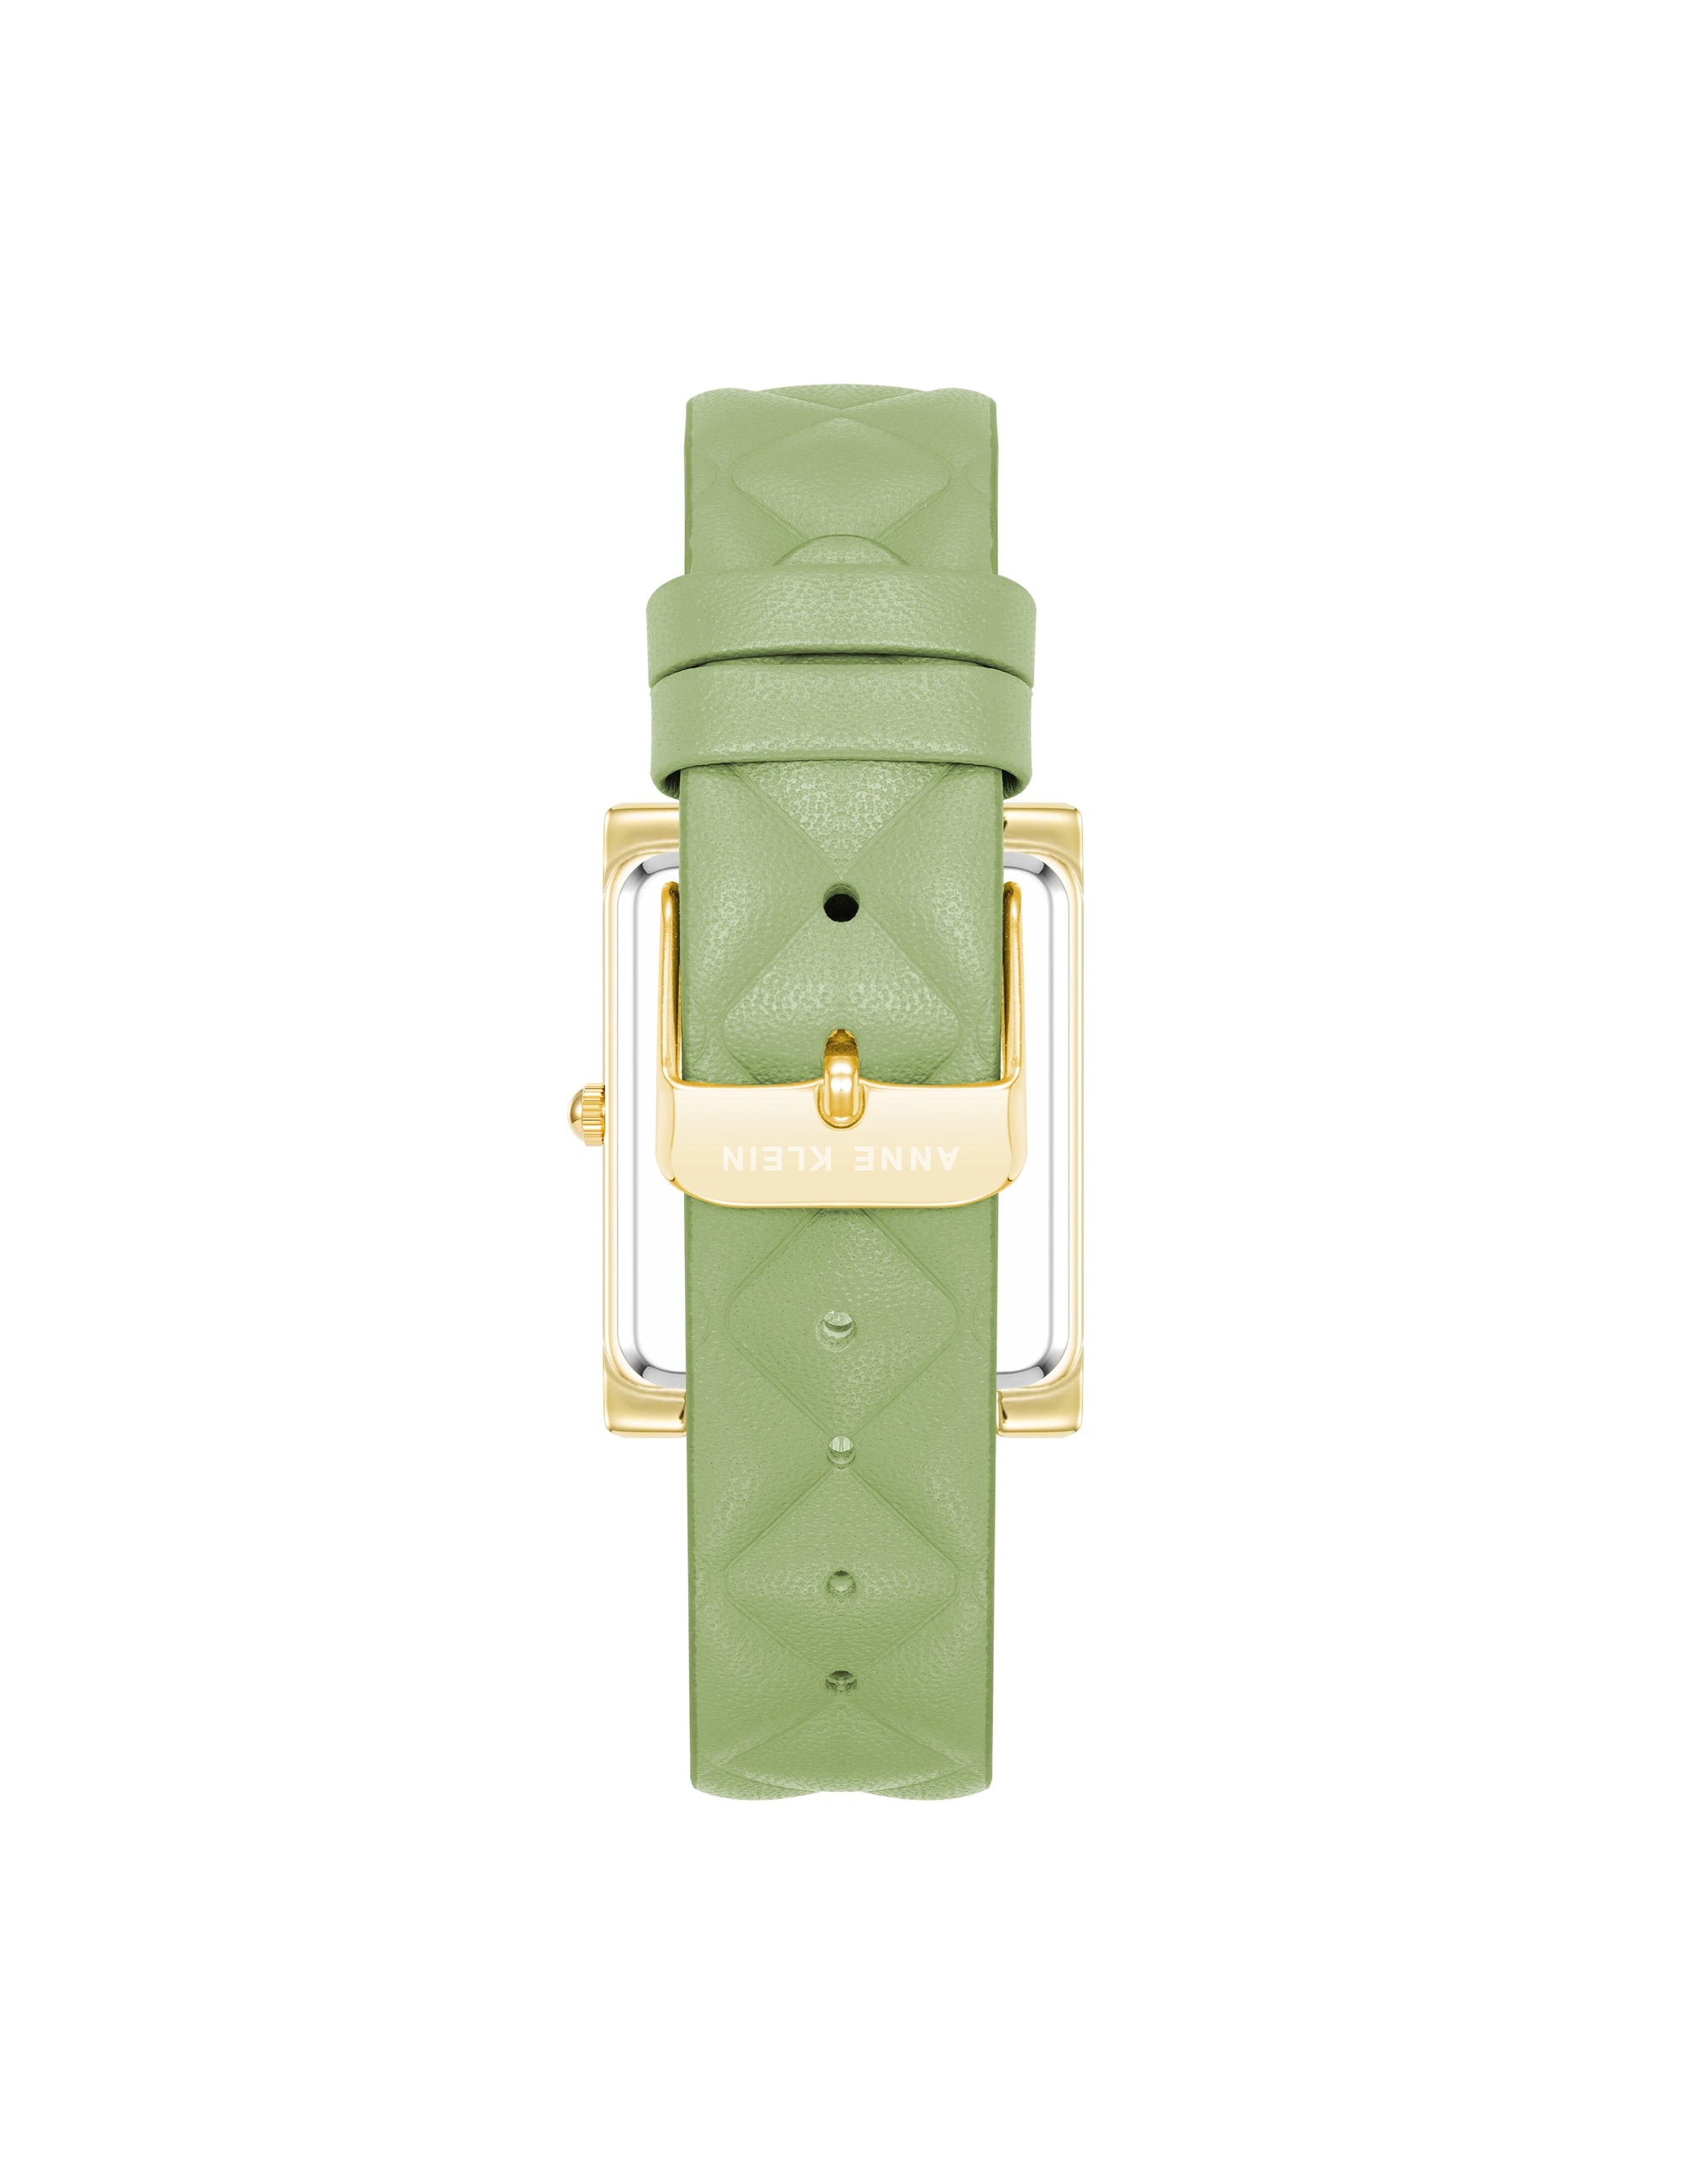 Anne Klein Green/Gold-Tone Rectangular Case Quilted Leather Band Watch